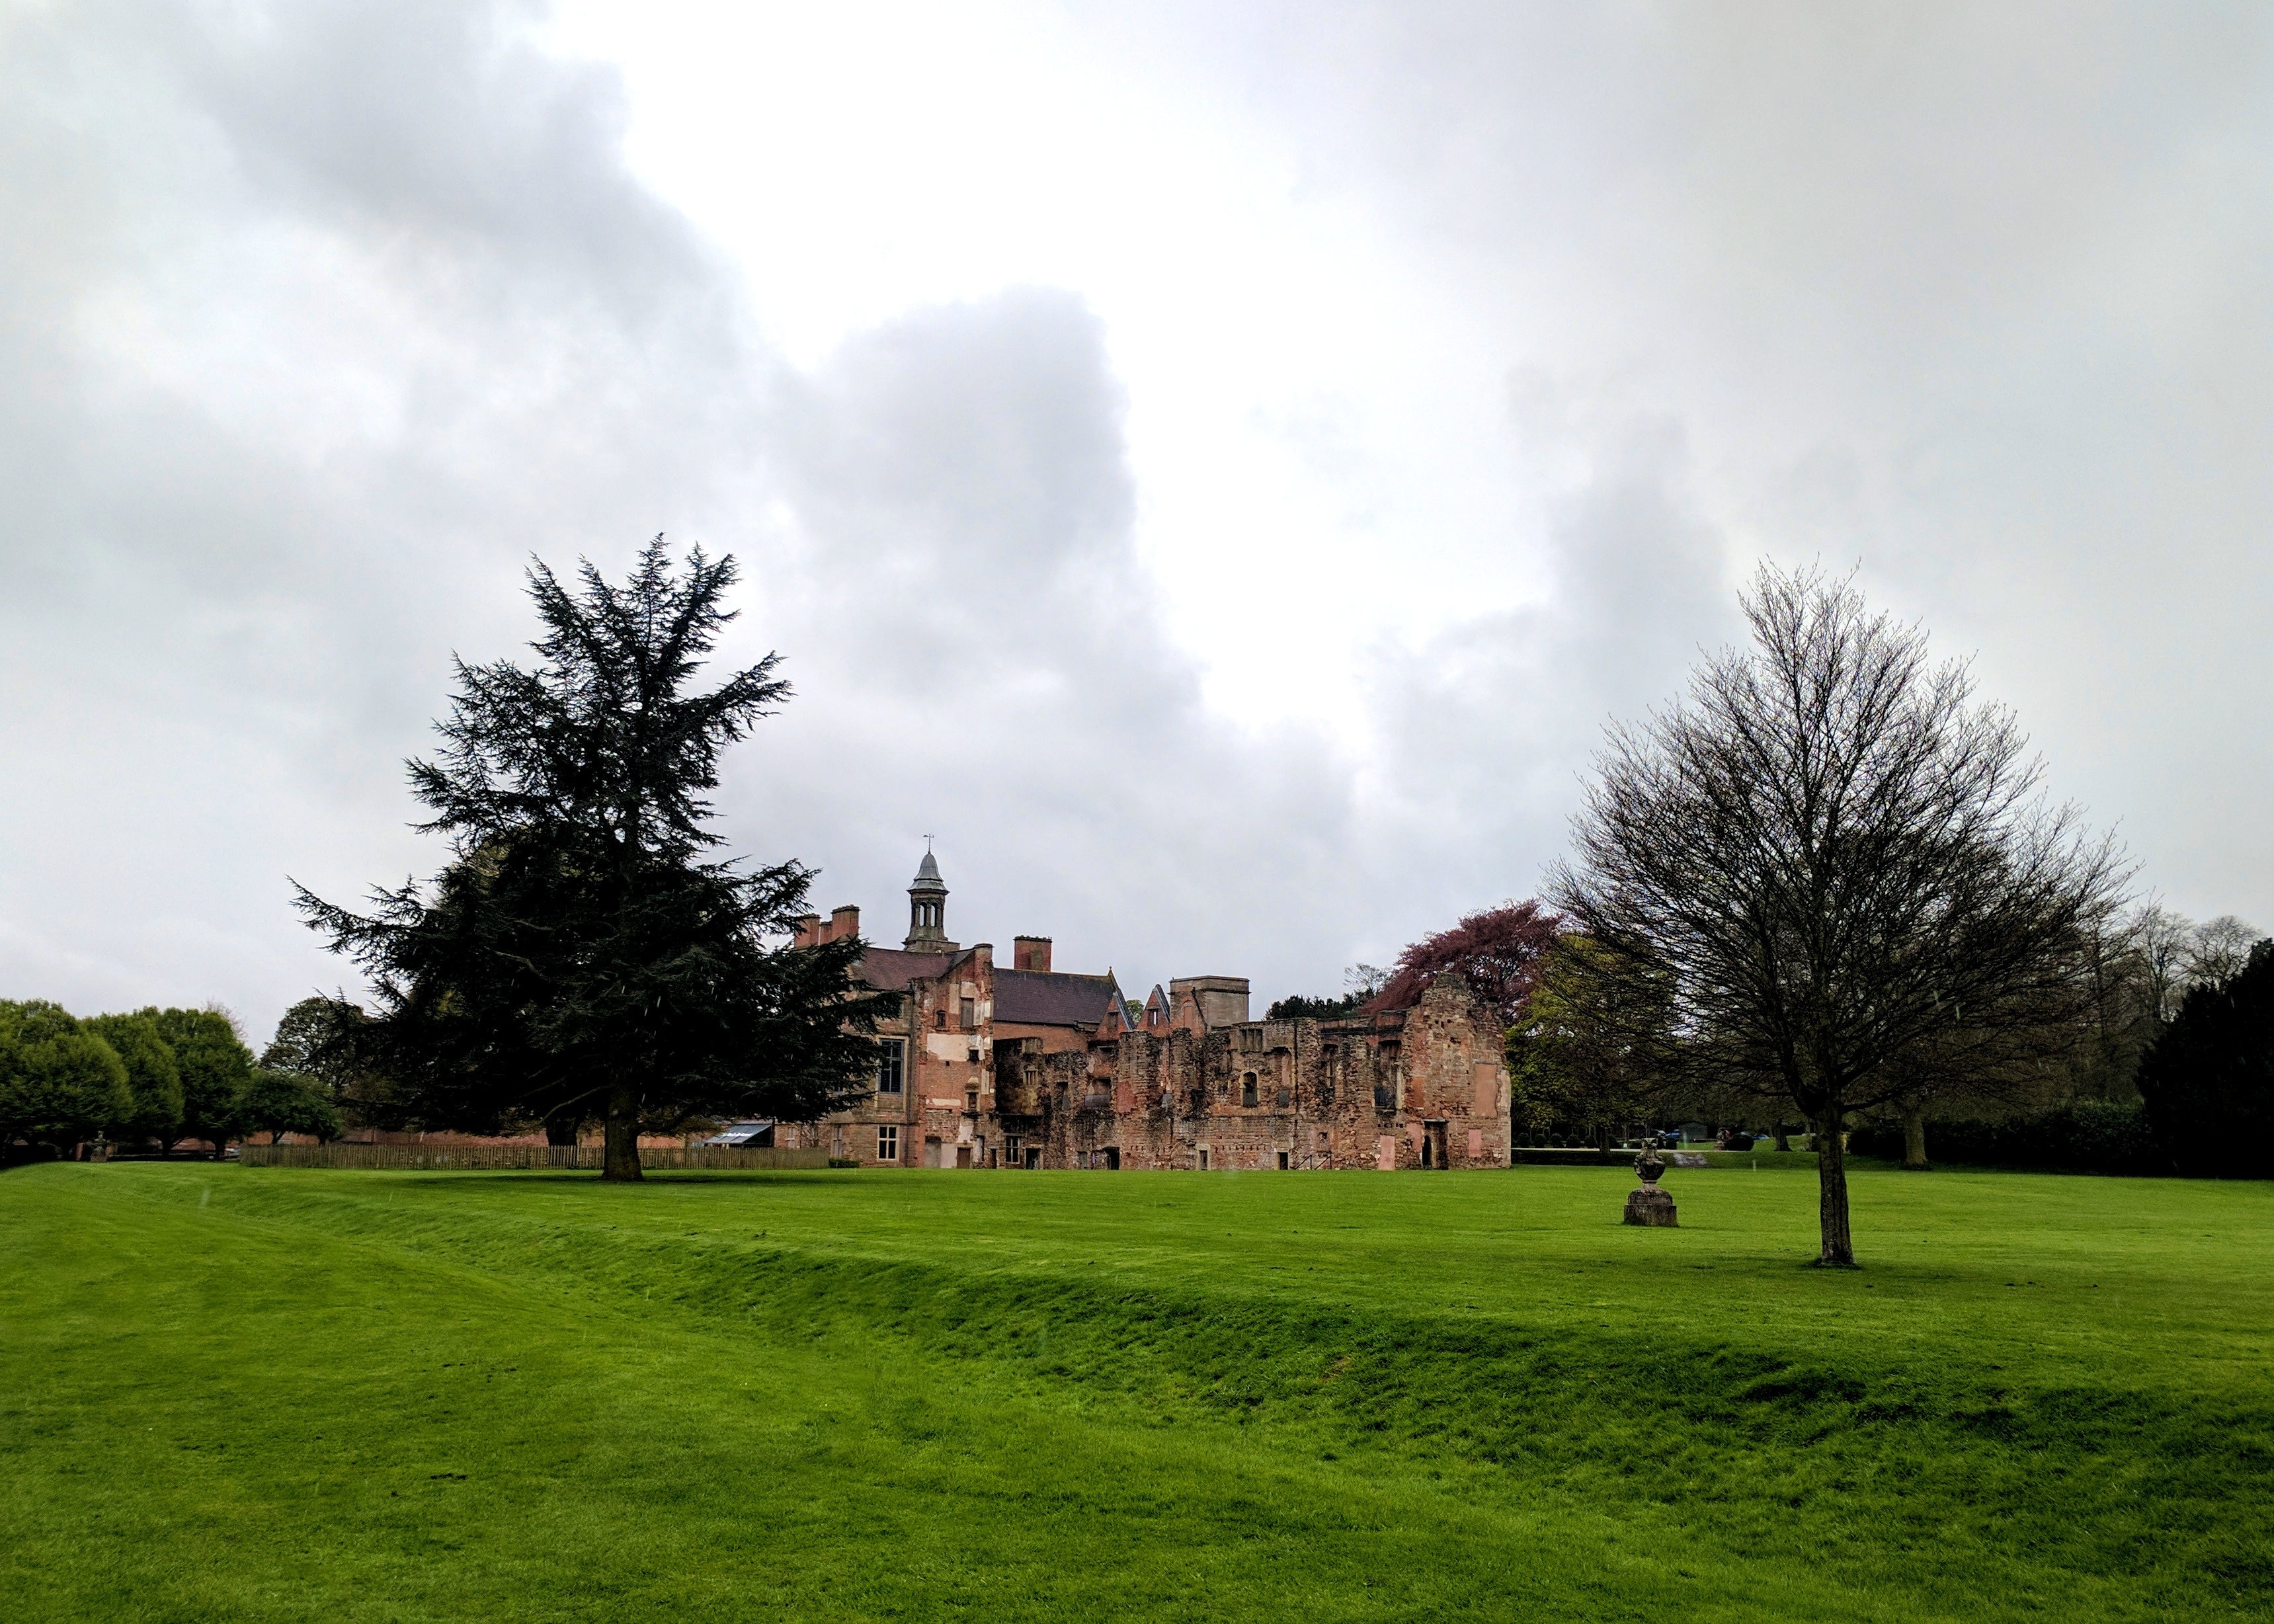 Rufford Abbey, Notts Wikidata has entry Q964363 with data related to this item.